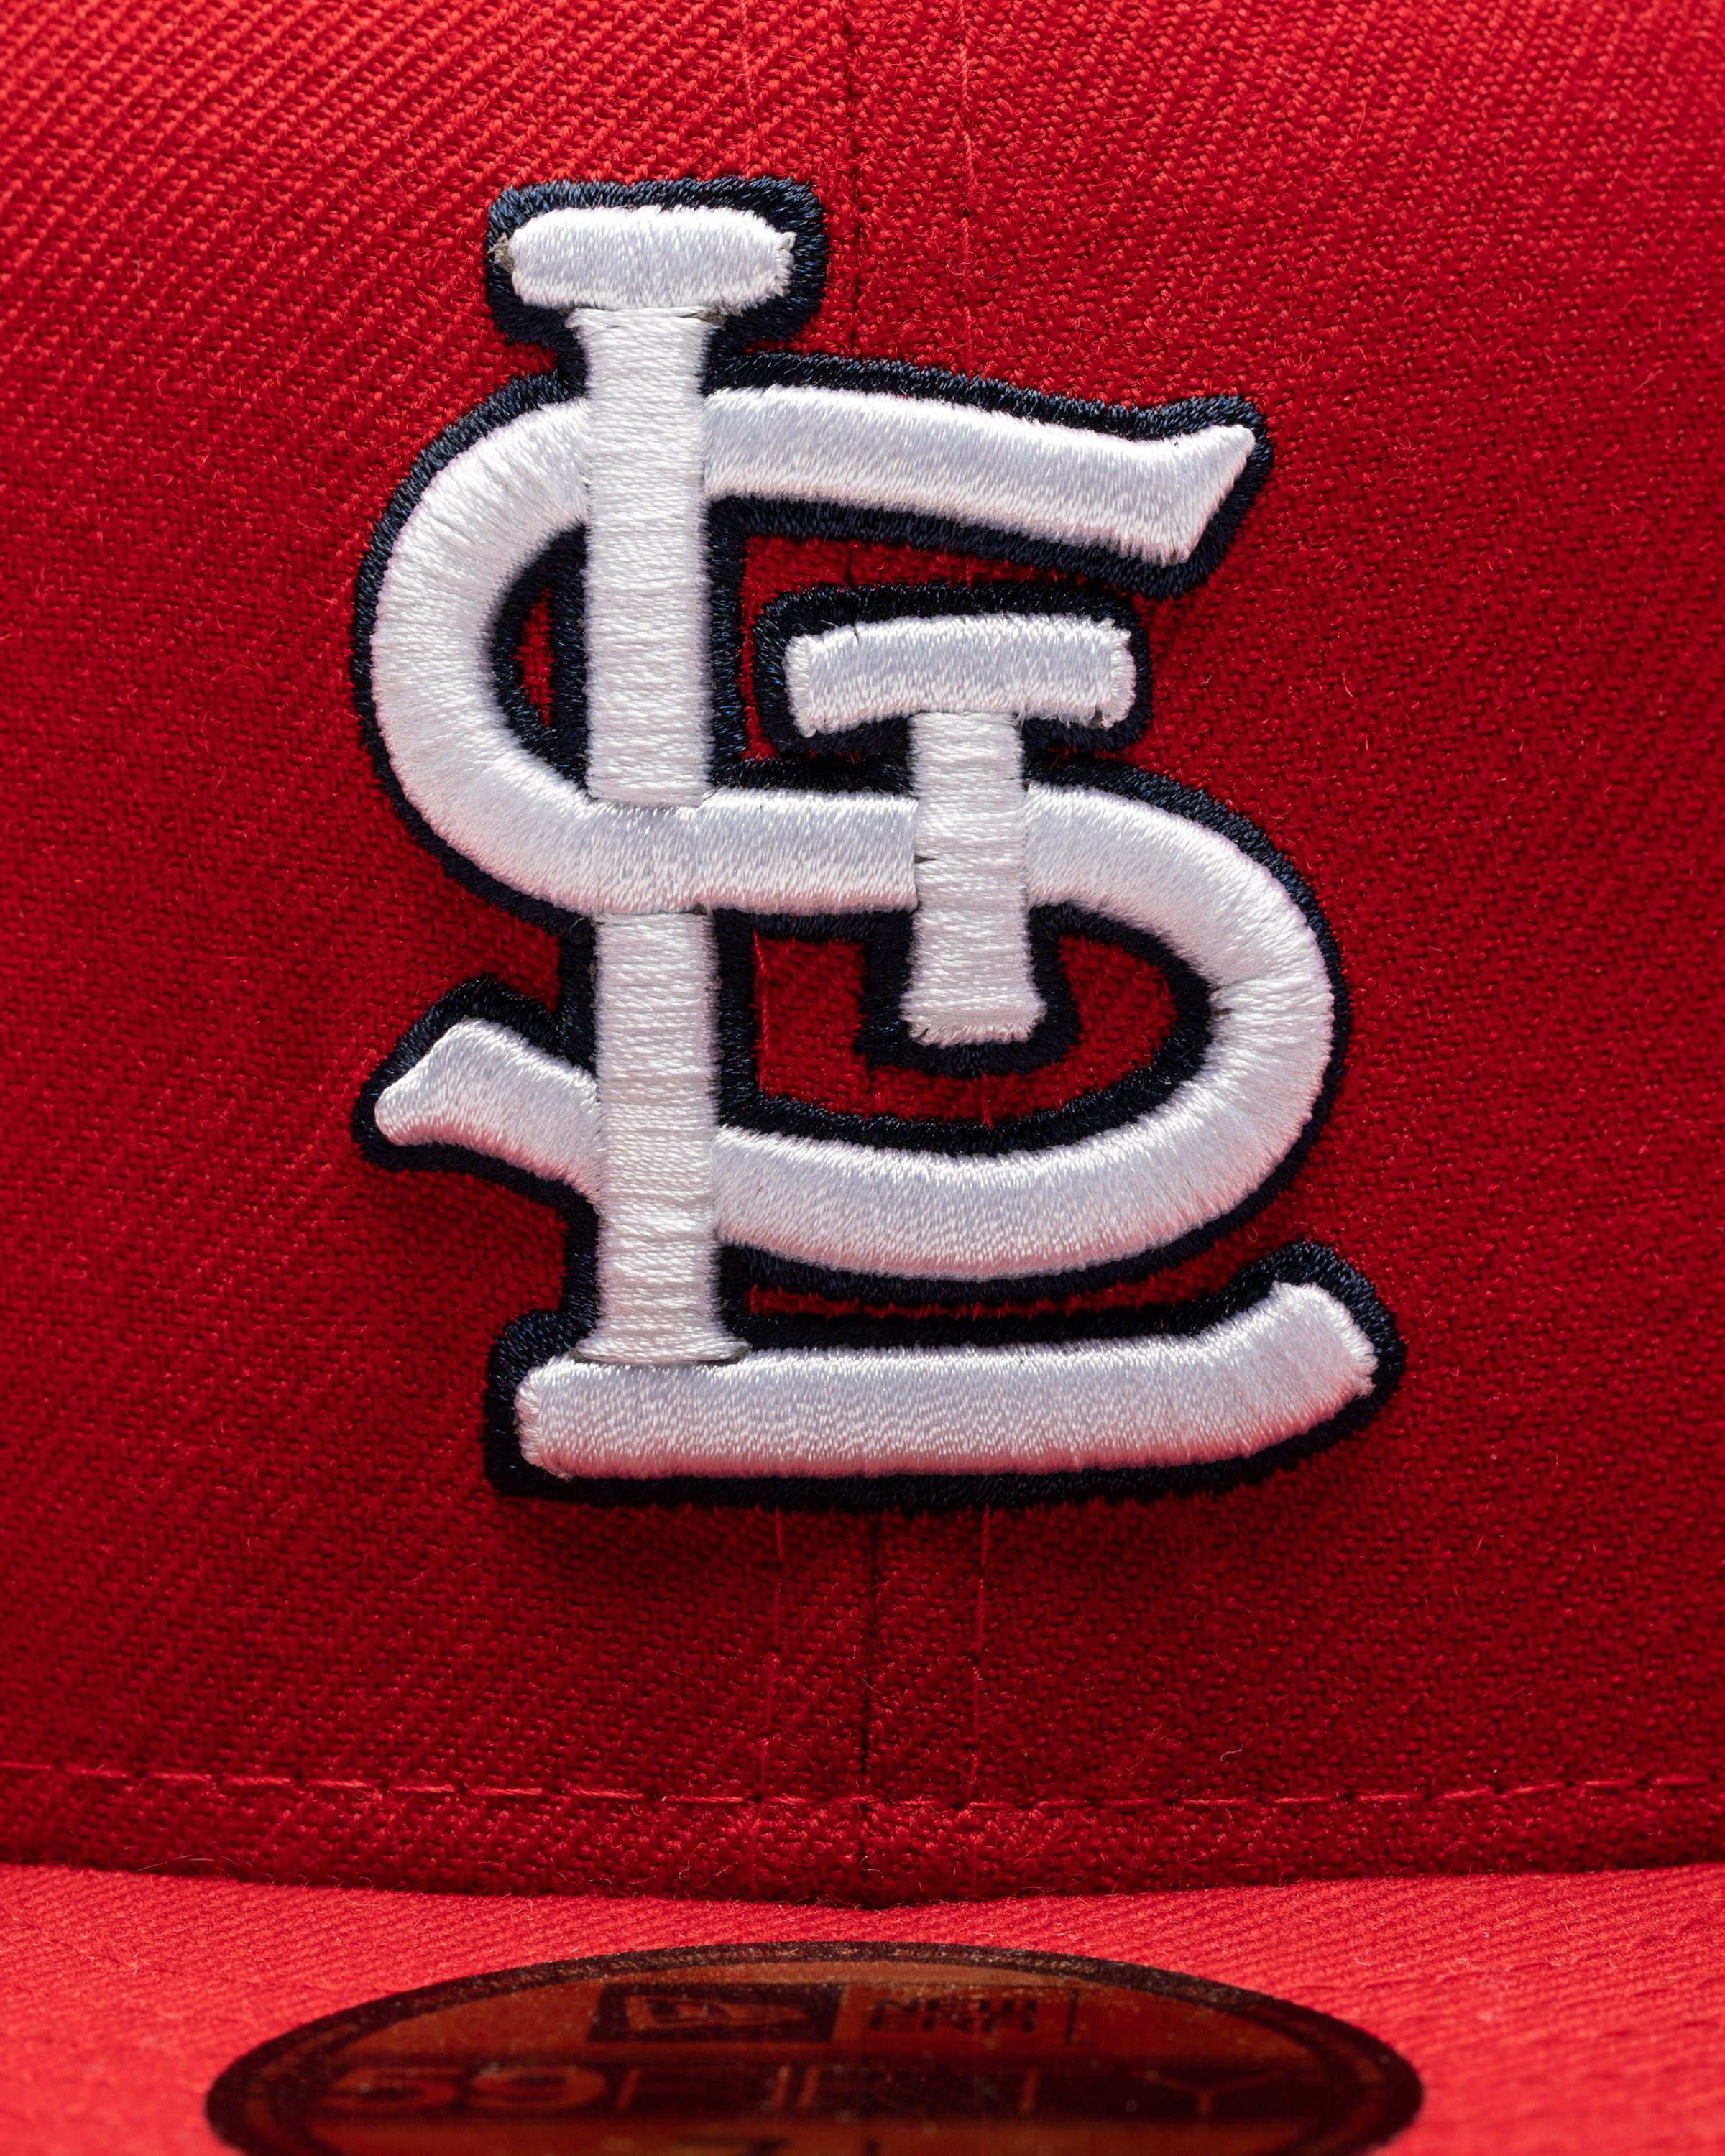 UNDEFEATED X NE X MLB FITTED - ST. LOUIS CARDINALS